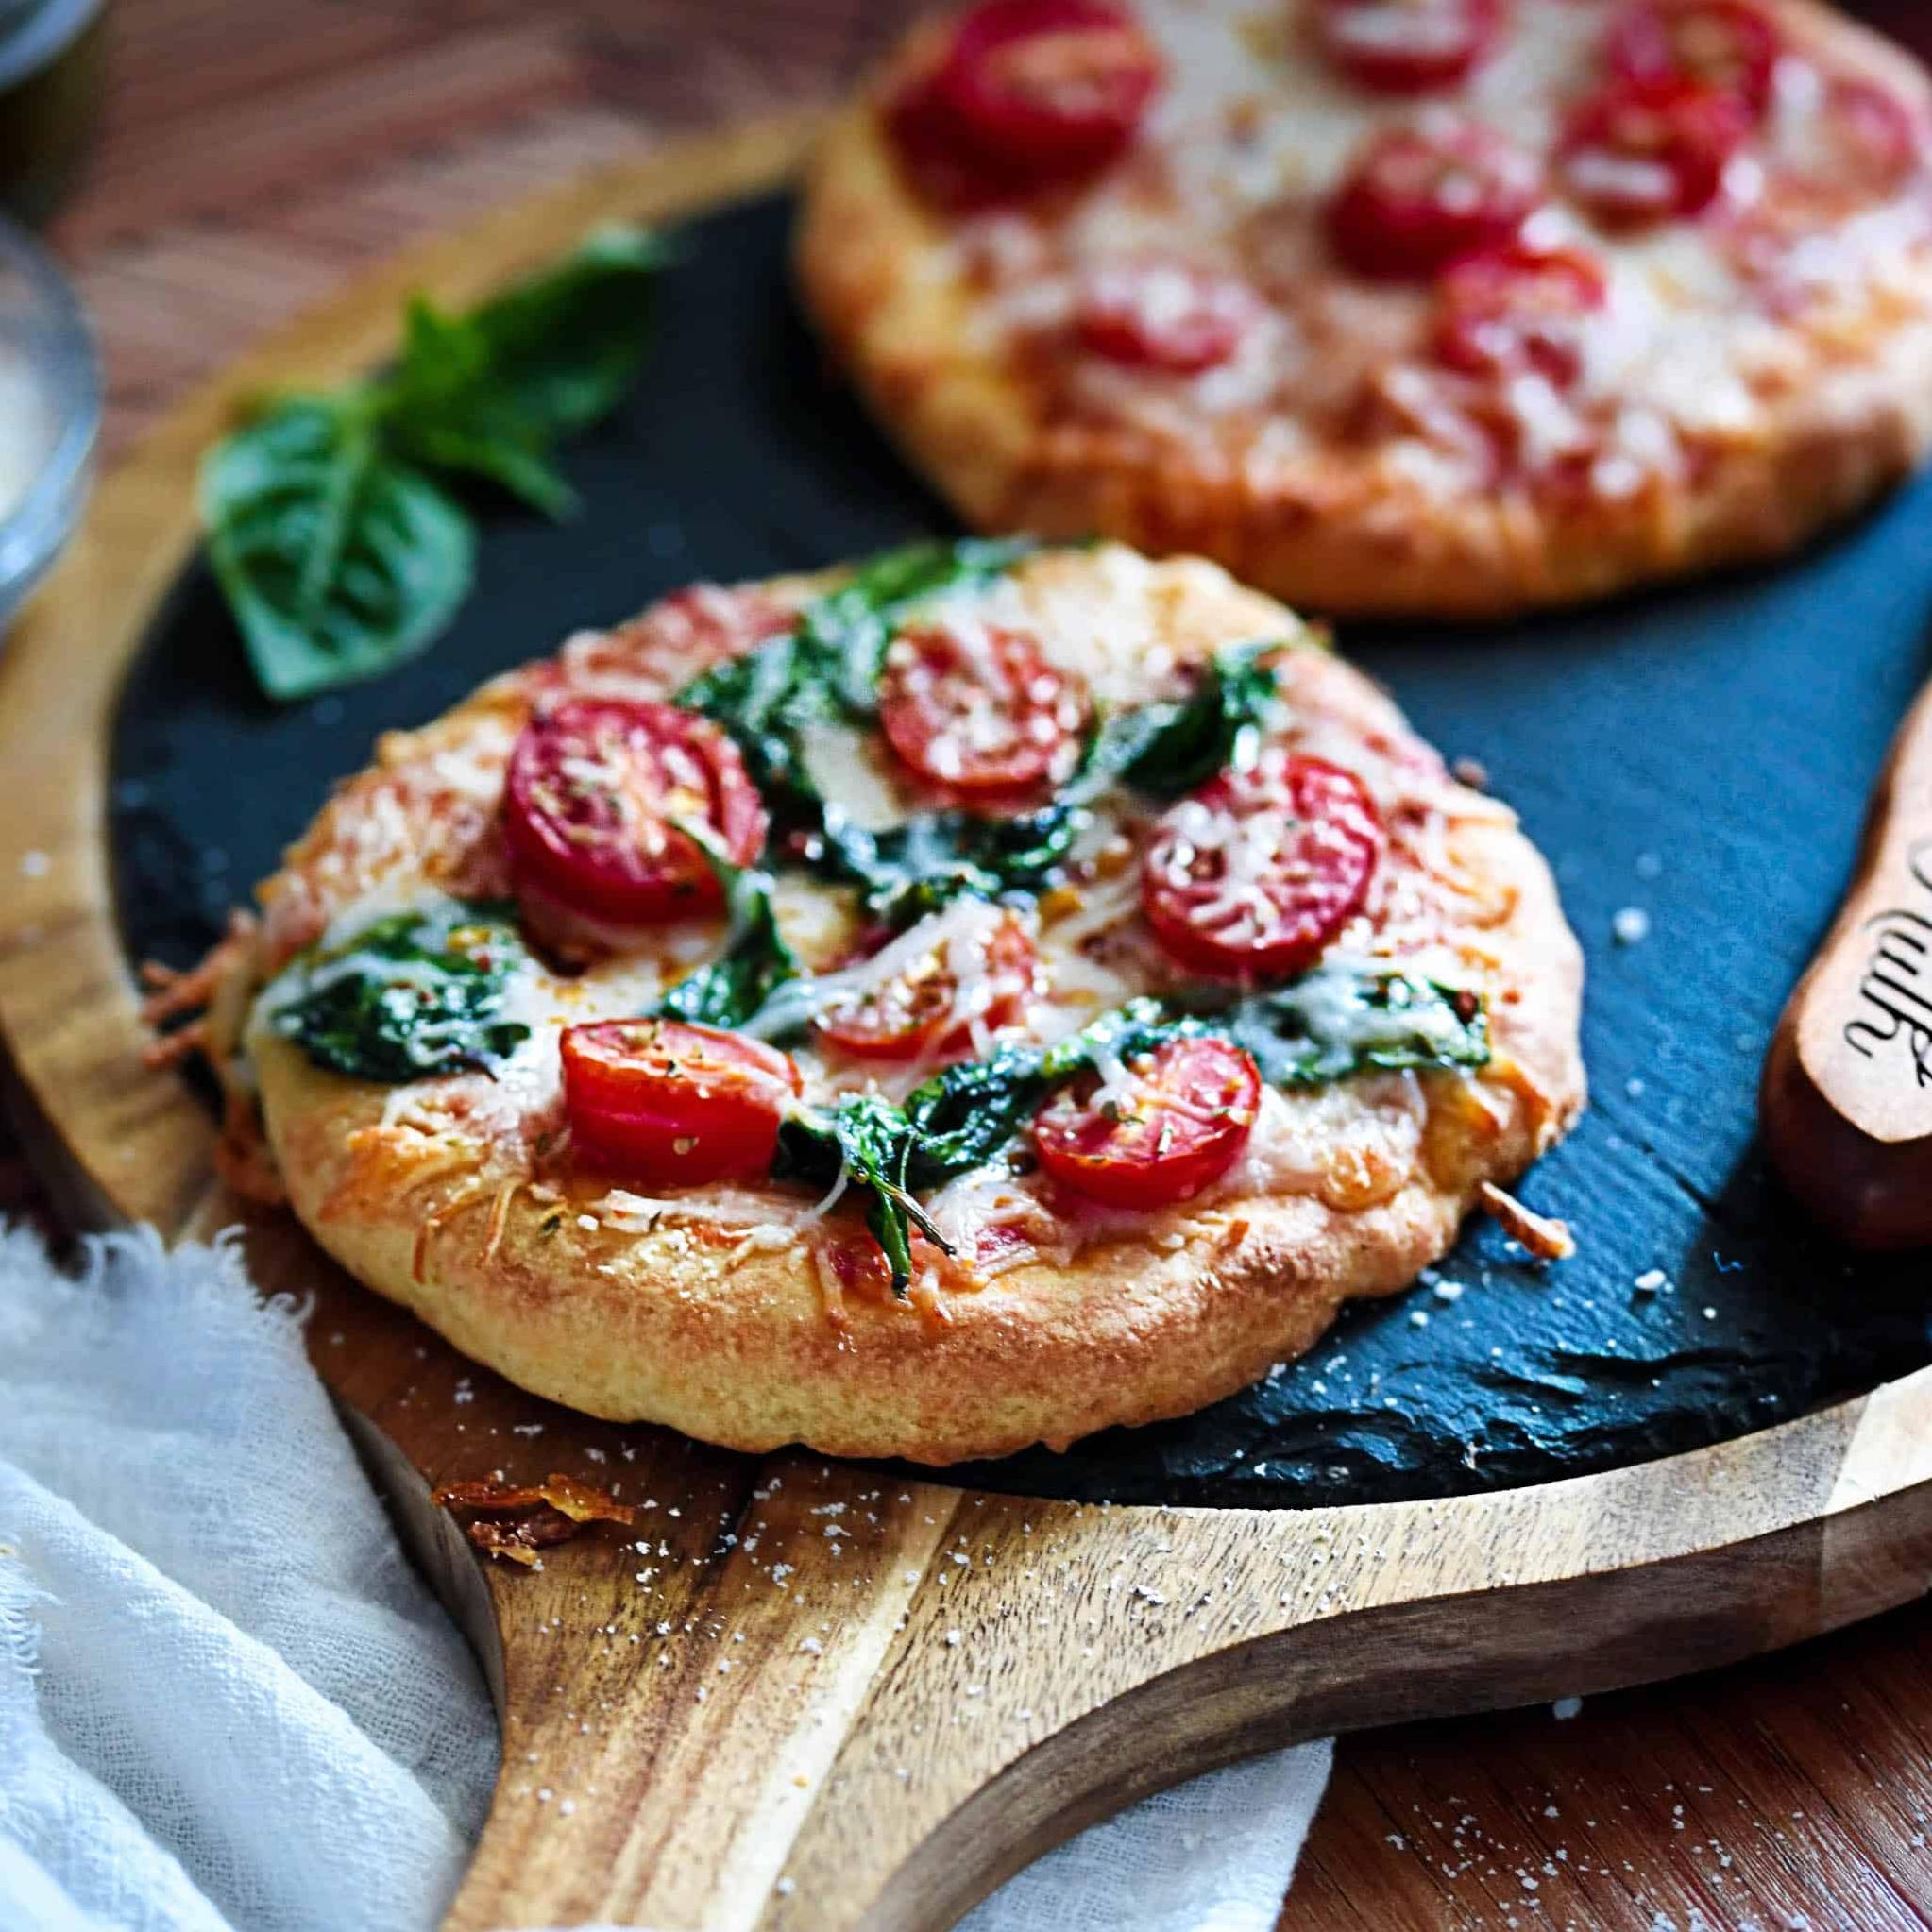  Finally, a gluten-free pizza crust that satisfies your cravings